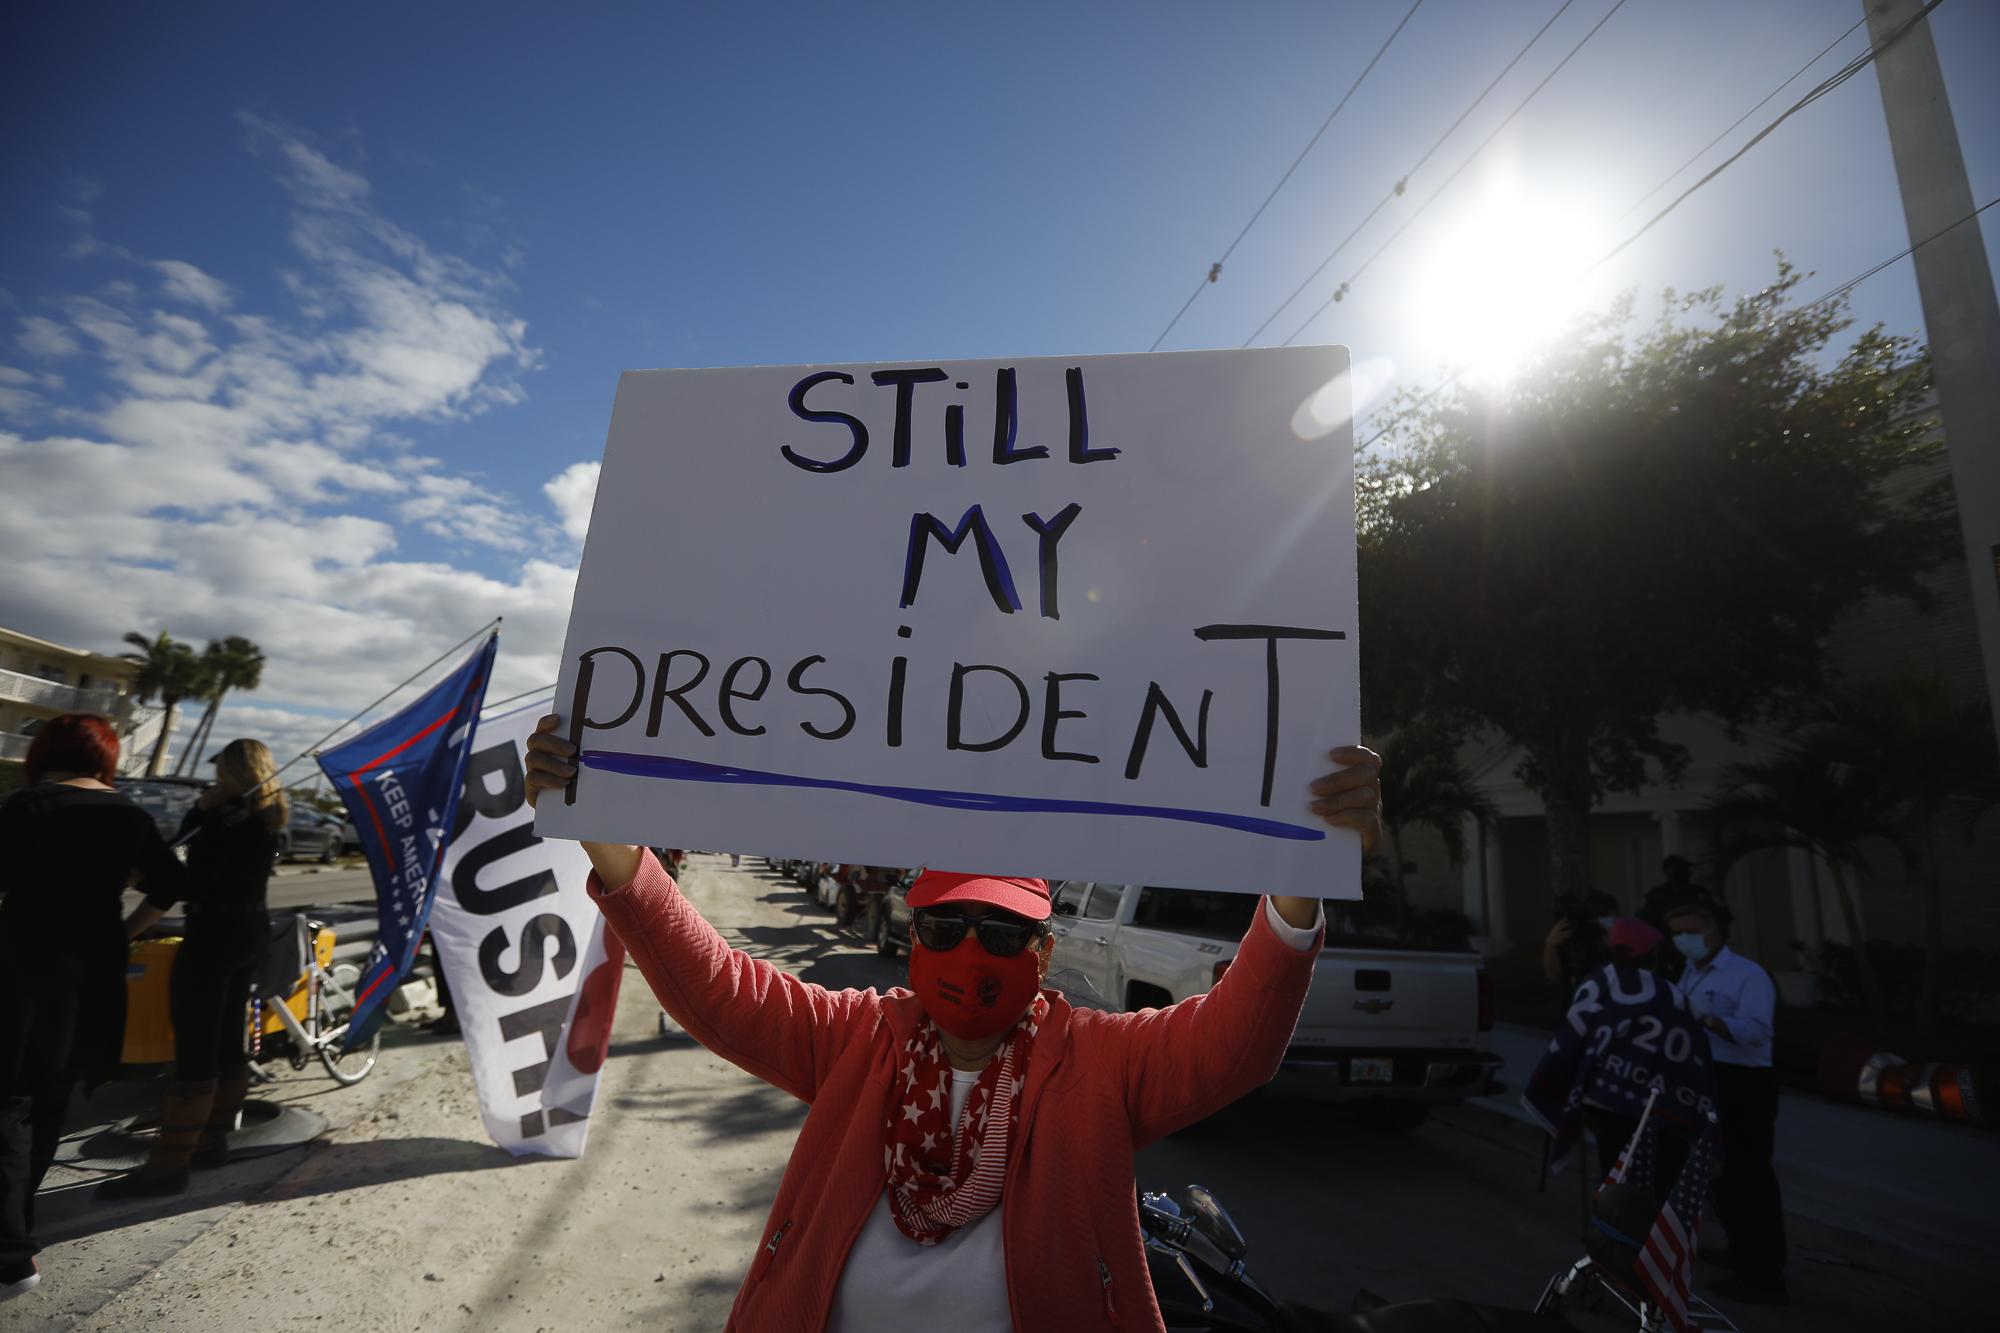 Farewell Mr. Trump - Supporters of President Donald Trump stand near the road...